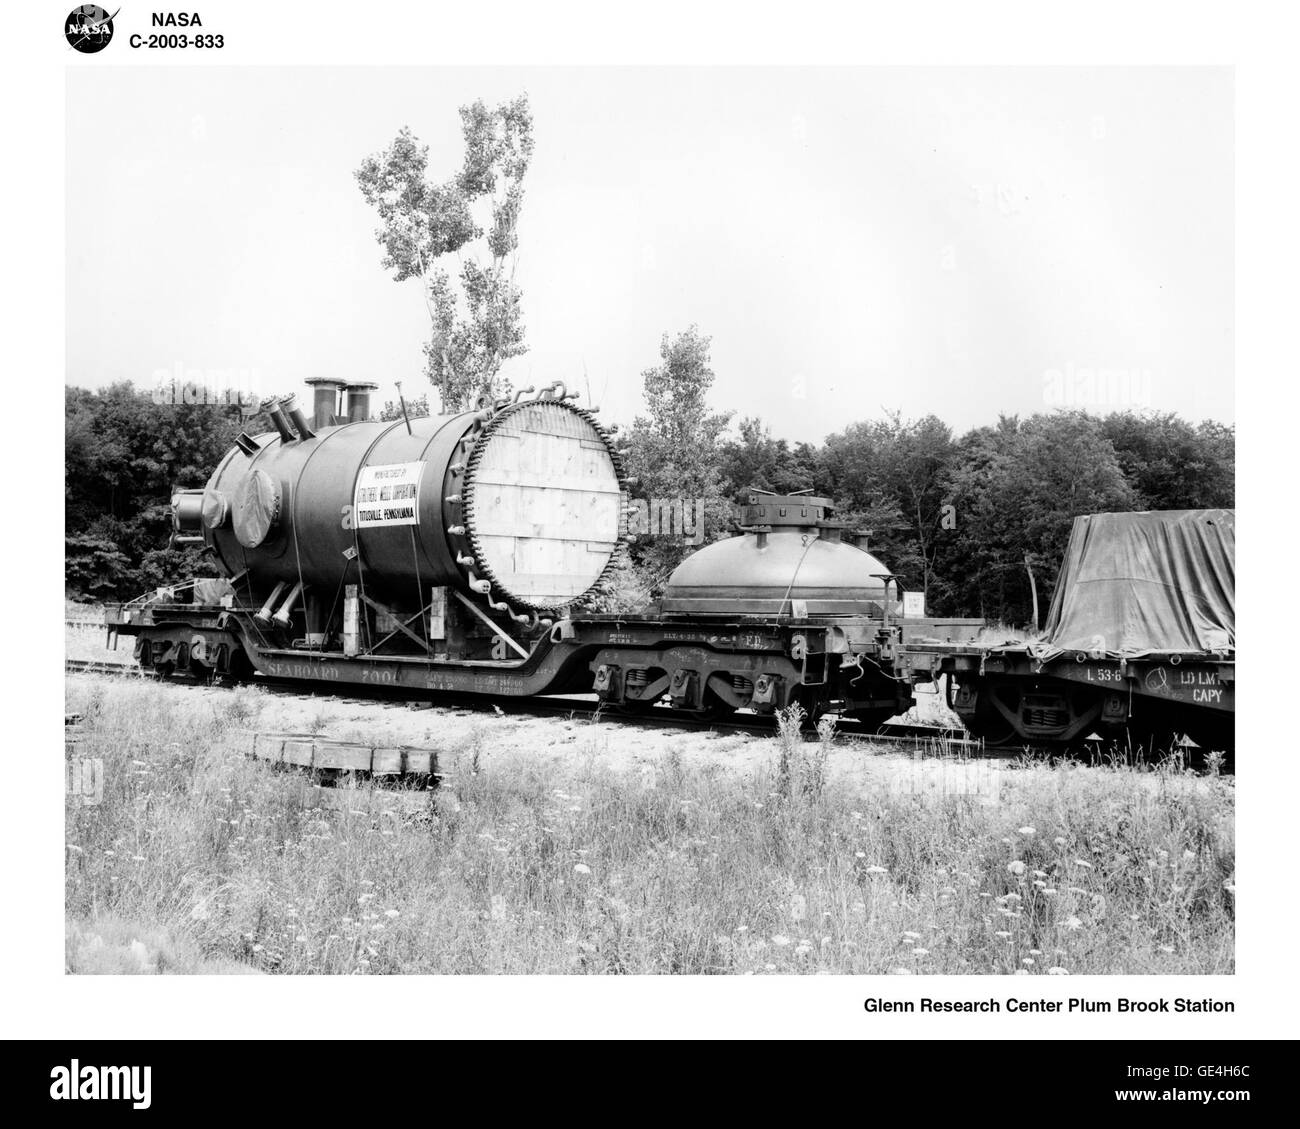 The pressure tank was shipped to Plum Brook via railway, and transported to the reactor facility on a flatbed truck. The tank was then rolled to a crane, which lifted it into place at the center of the unfinished quadrant area. Several pipes jutted out from the tank. These &quot;test holes&quot; would be used to transport experiments to the reactor core for radiation during its operating cycles.  Image #: C-2003-833 Stock Photo